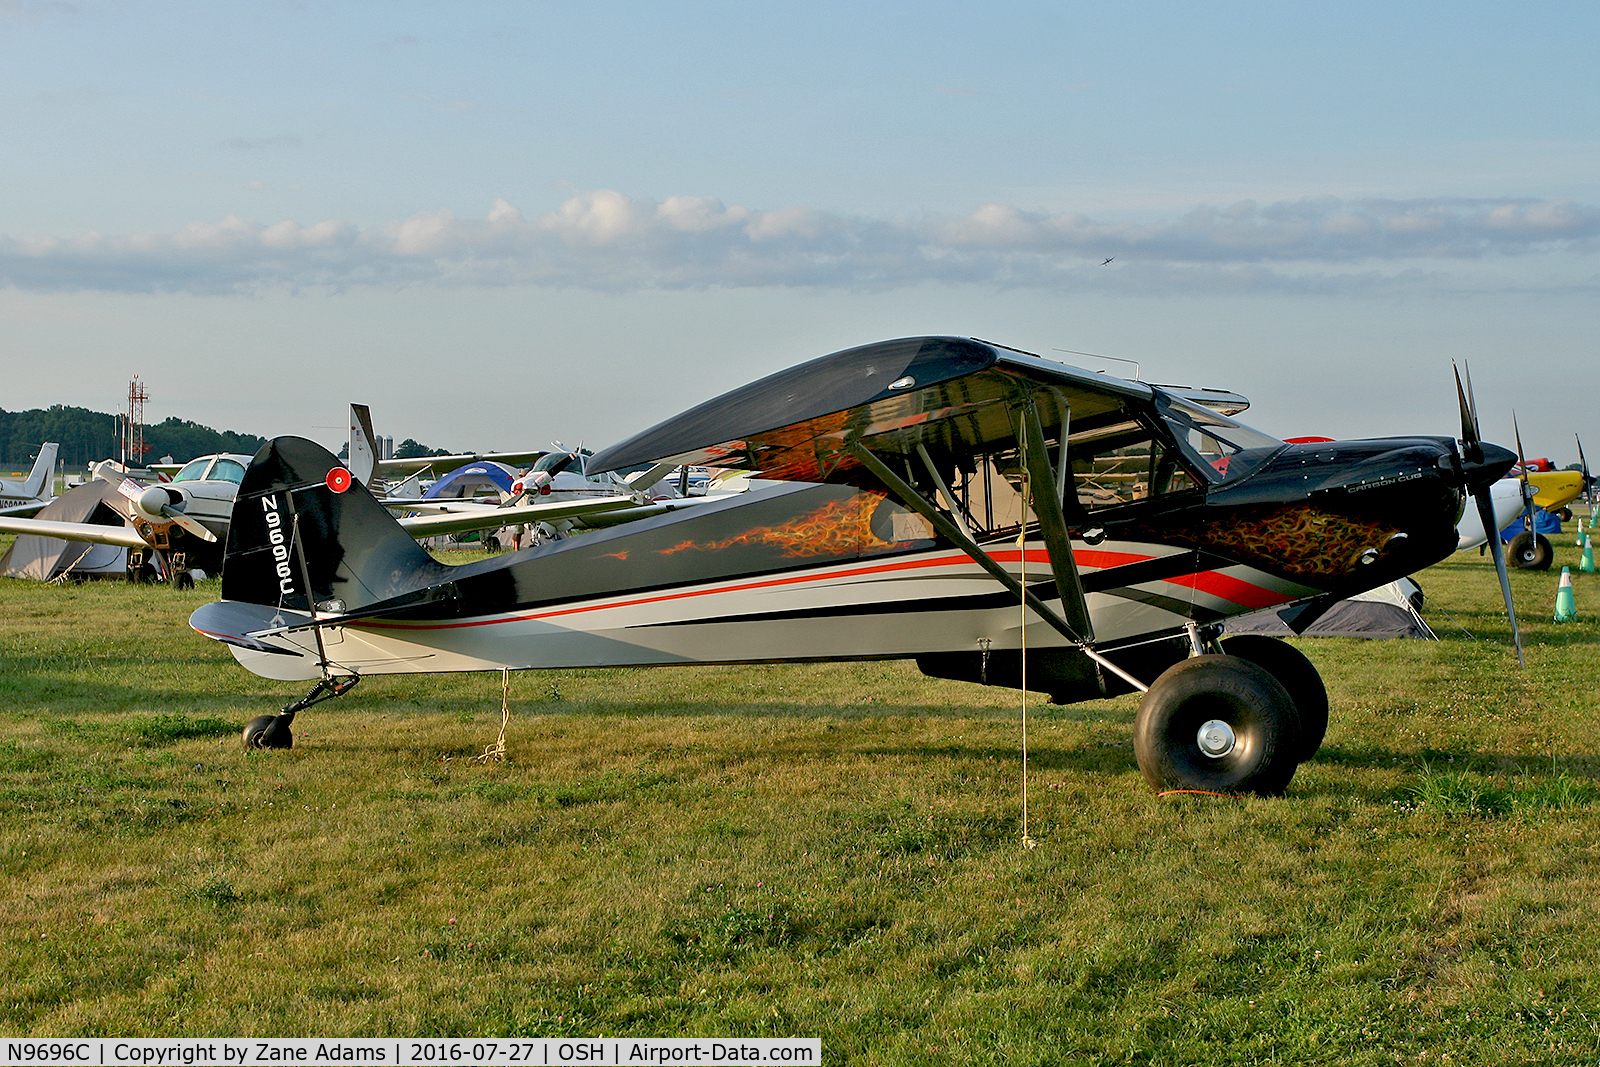 N9696C, 2007 Cub Crafters Carbon Cub C/N 001, At the 2016 EAA AirVenture - Oshkosh, Wisconsin